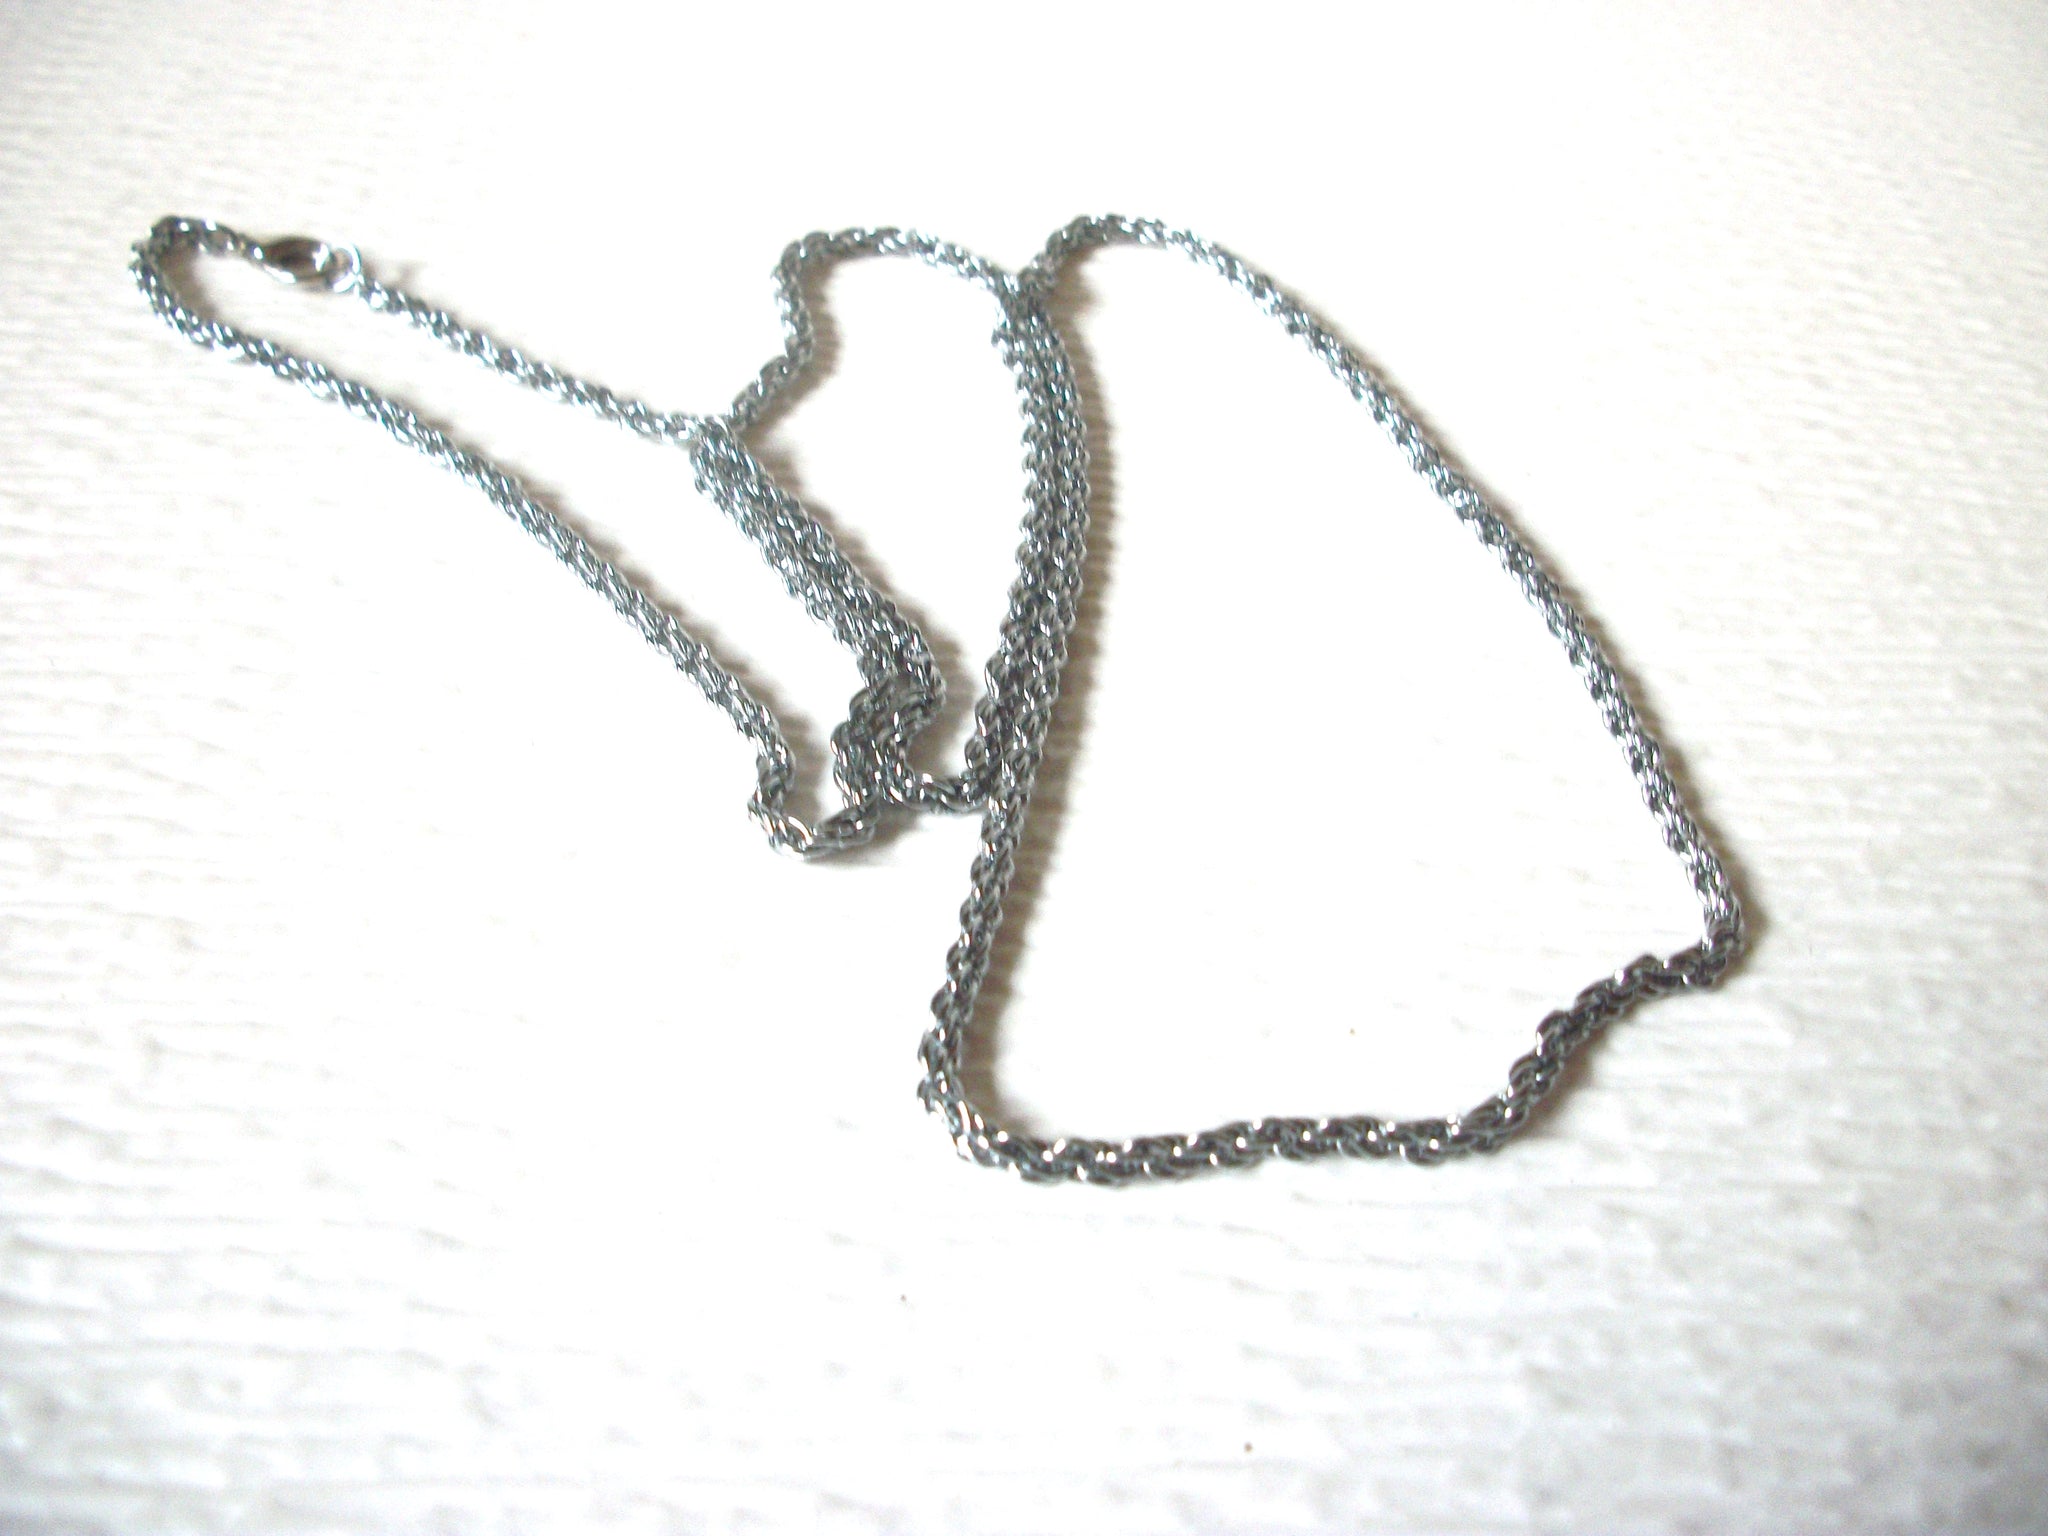 Vintage Silver Toned Chain Links 26" Necklace 123116